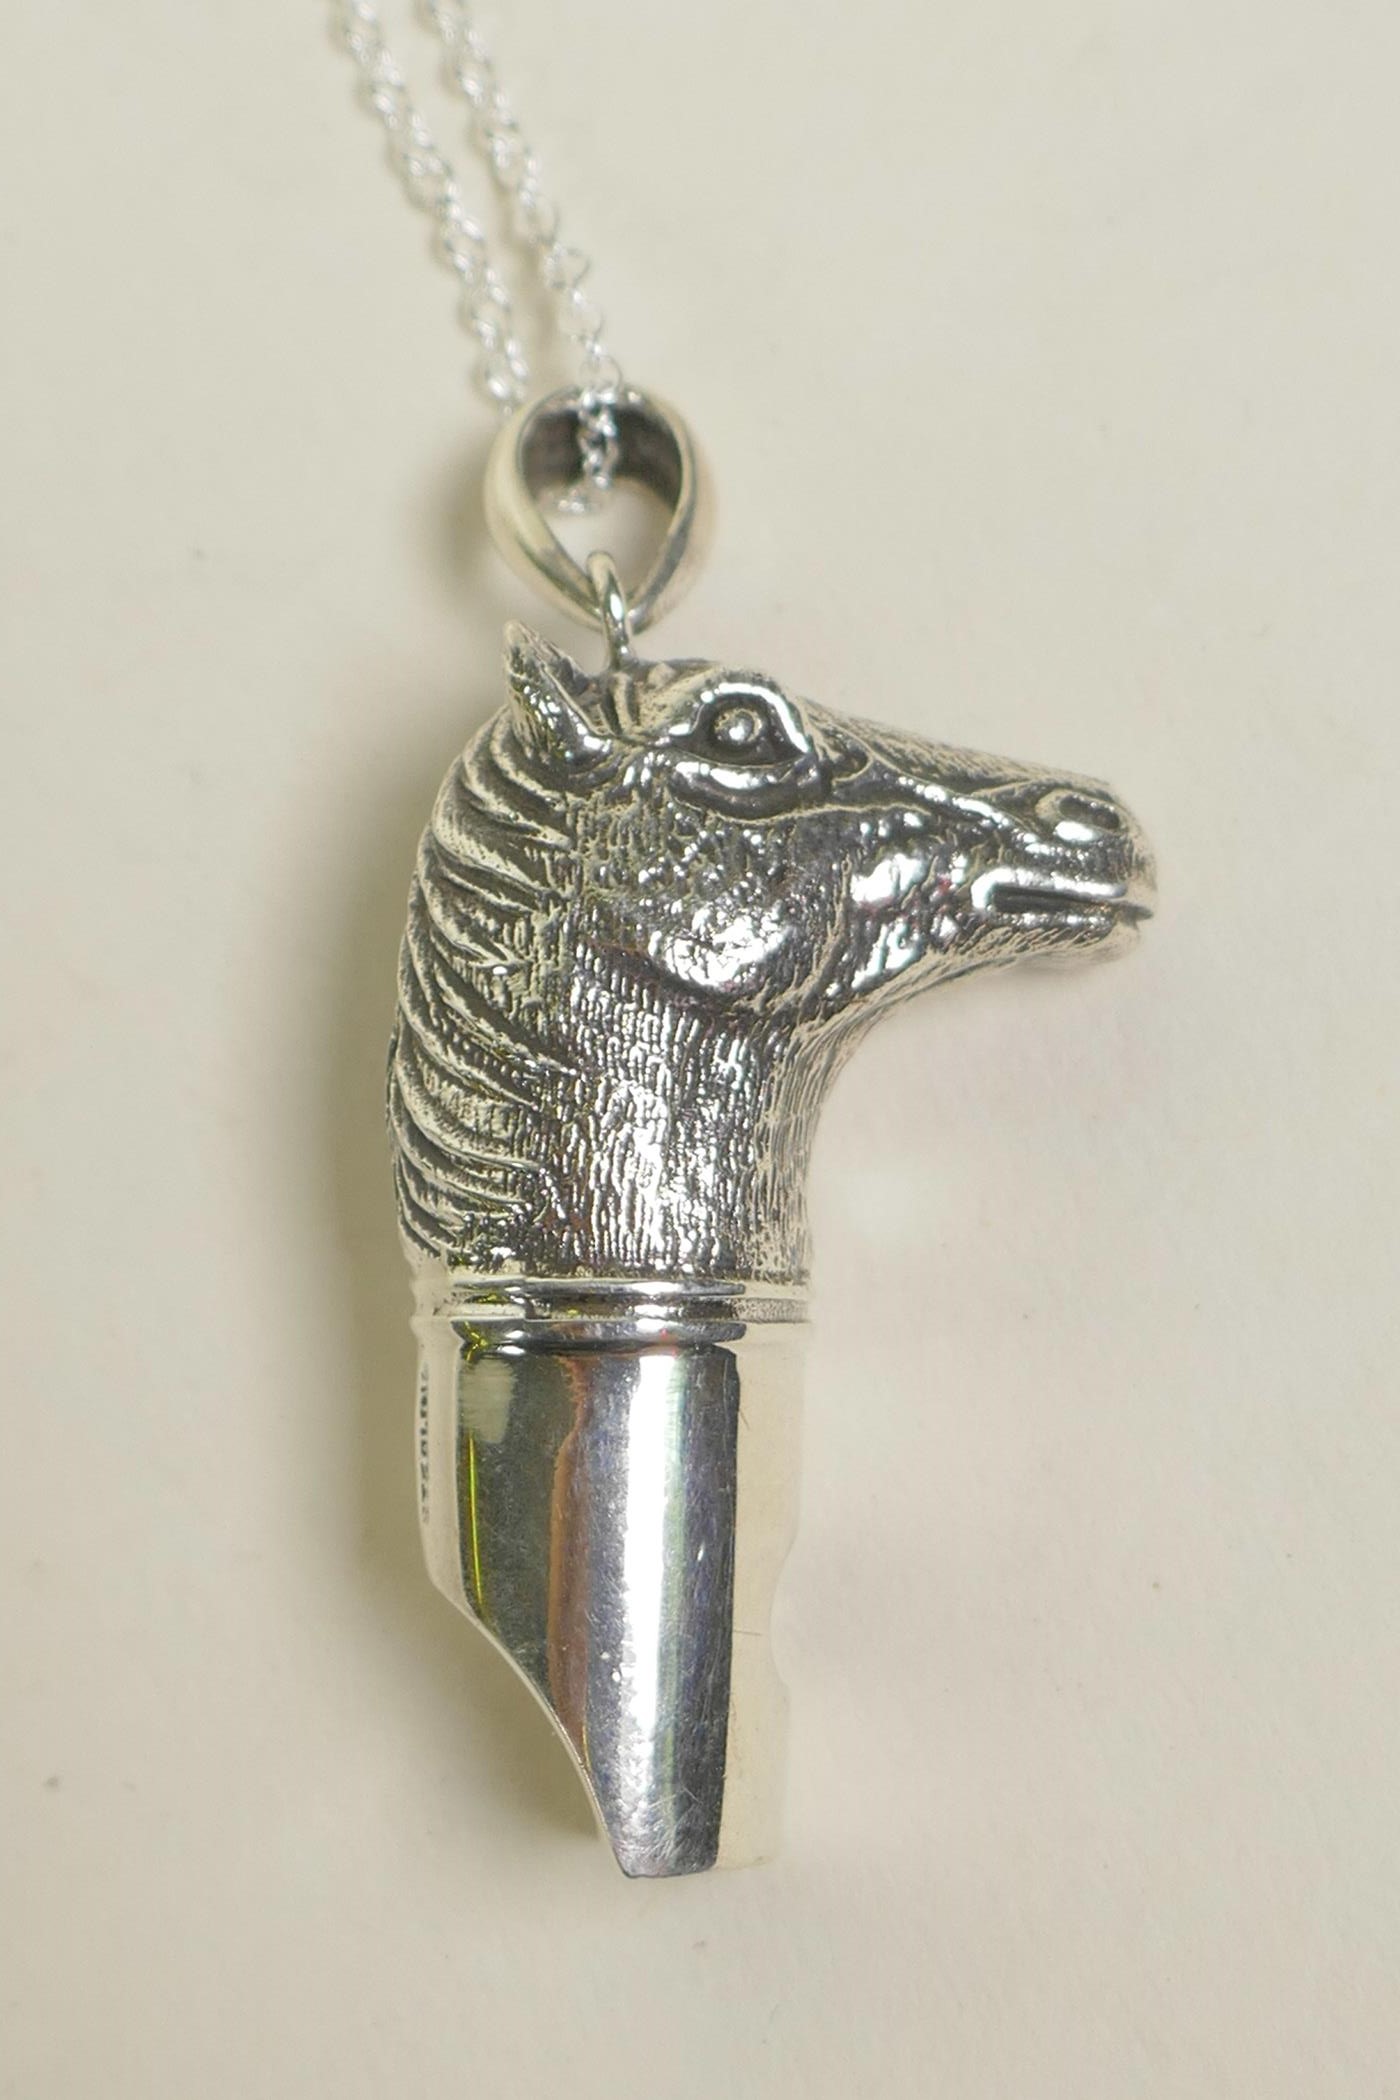 A sterling silver pendant whistle in the form of a horse head, 1½"